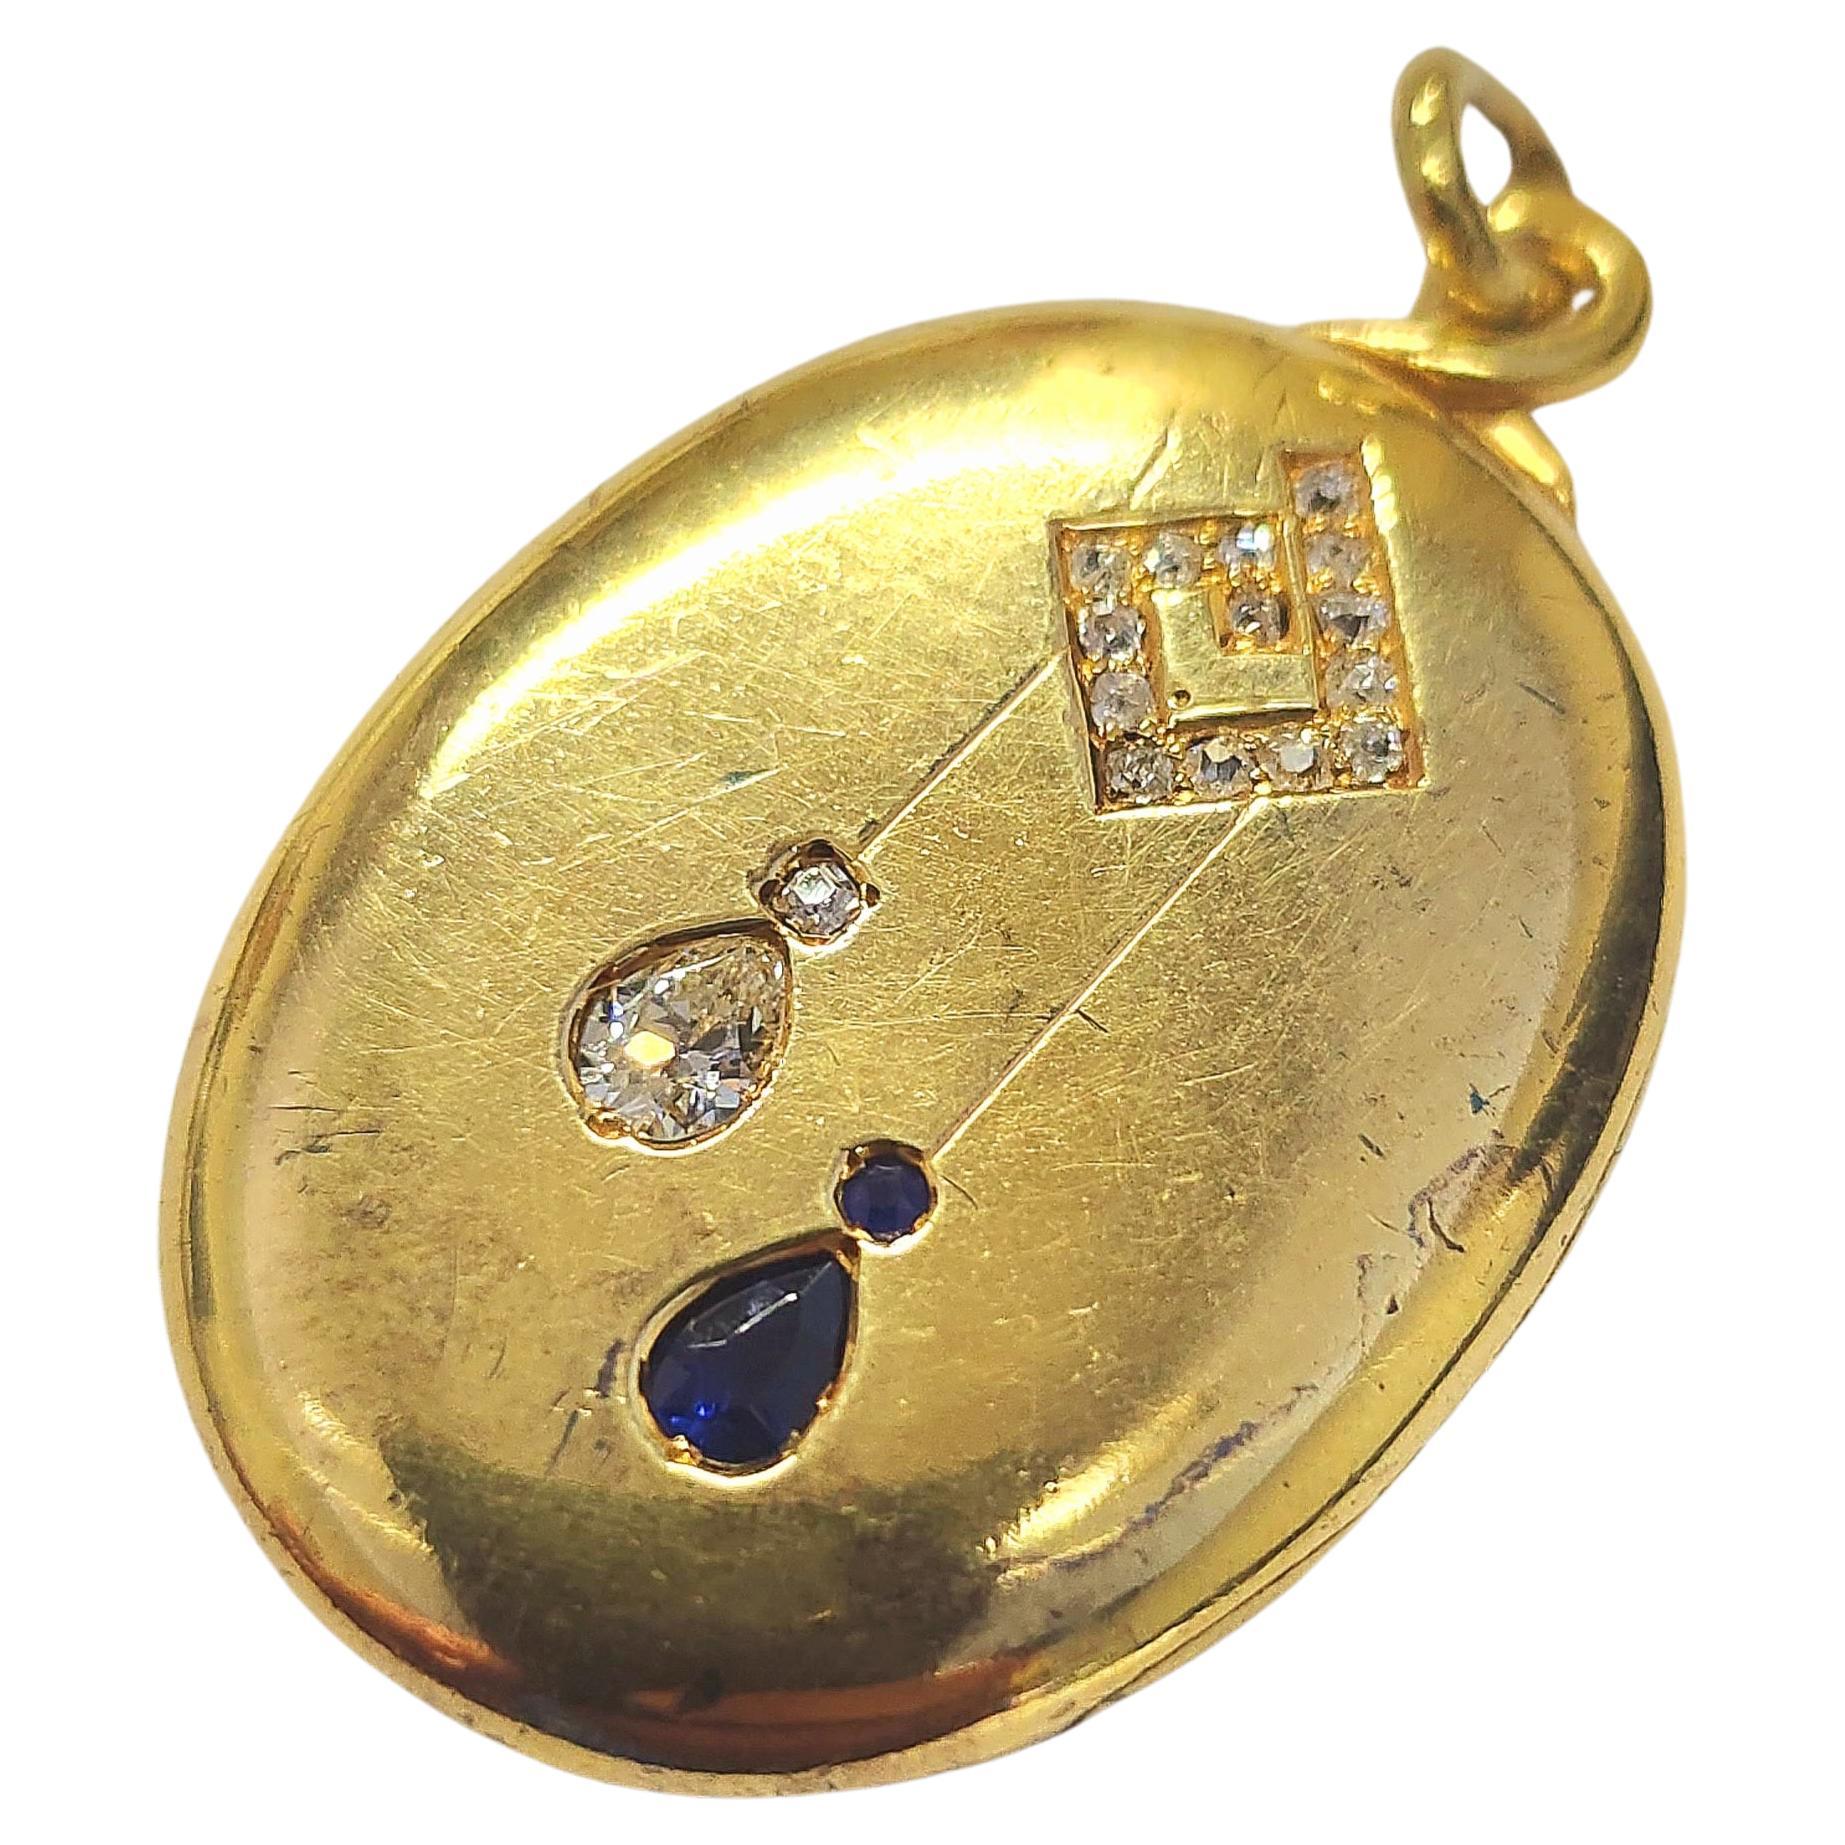 Antique 14k gold russian locket pendant centered with a pear shape old cut diamond and navy blue natural sapphire pendant dates back to the russian imperial era 1880/1899.c hall marked 56 imperial russian gold standard with a total gold weight of 13